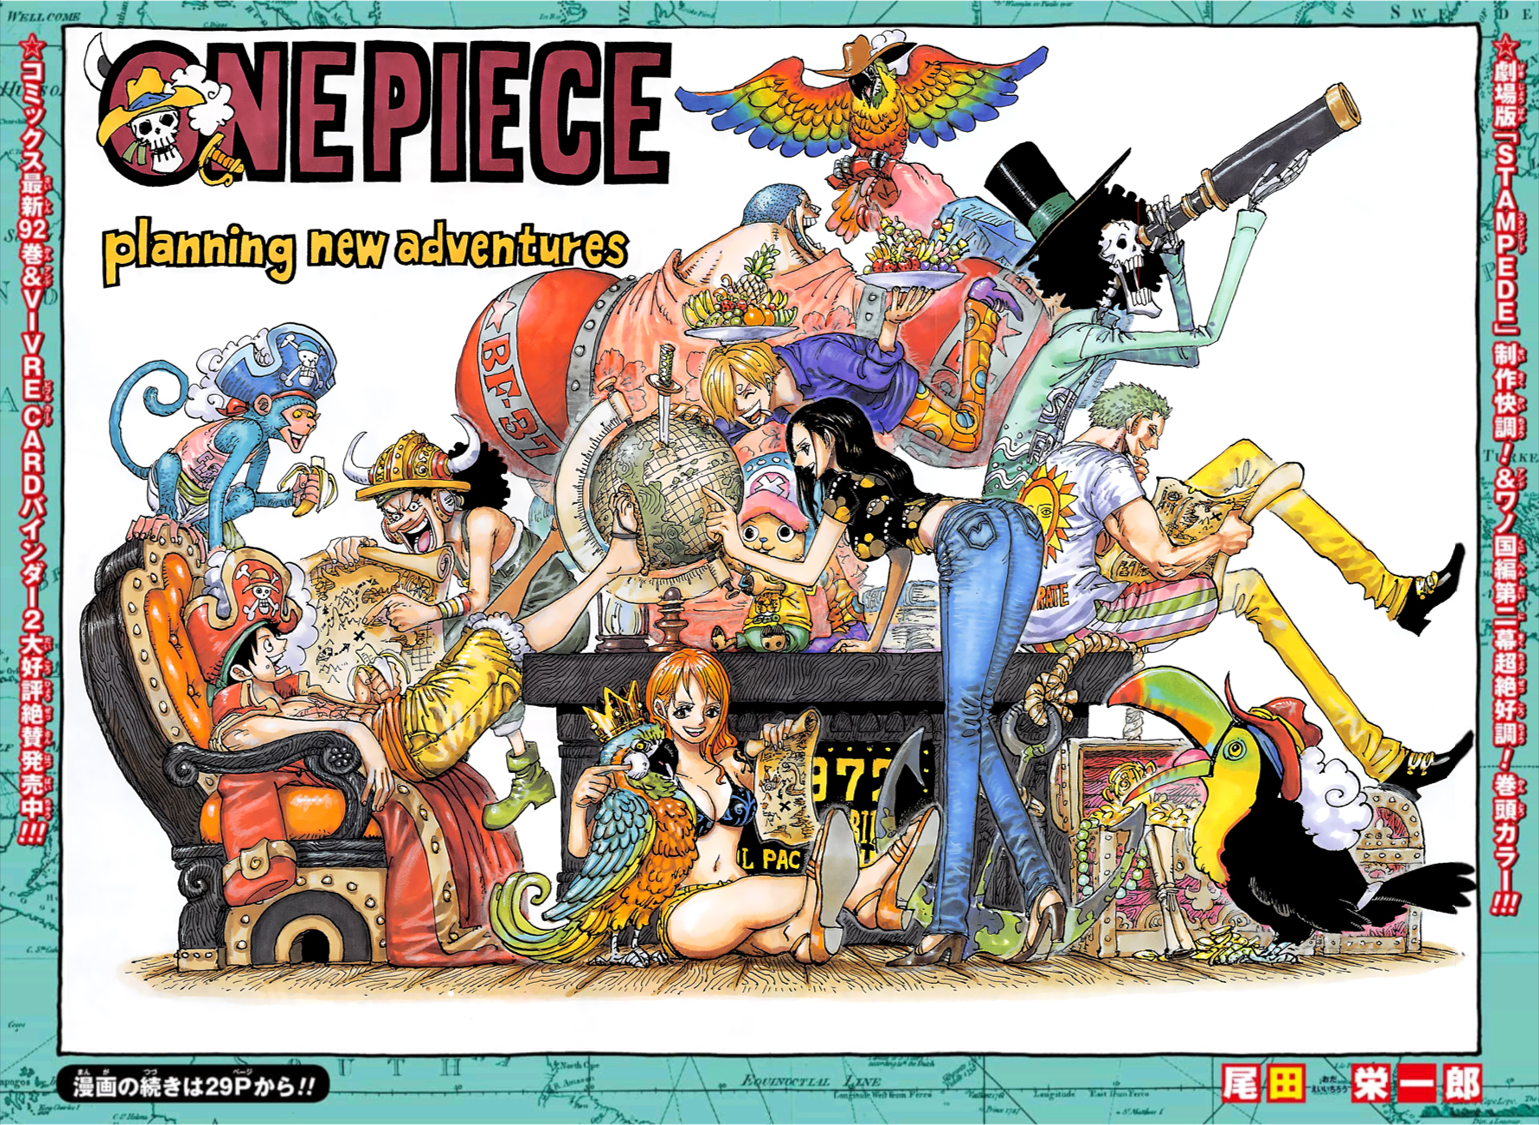 Monkey D Luffy from Colorspread 1045 One Piece